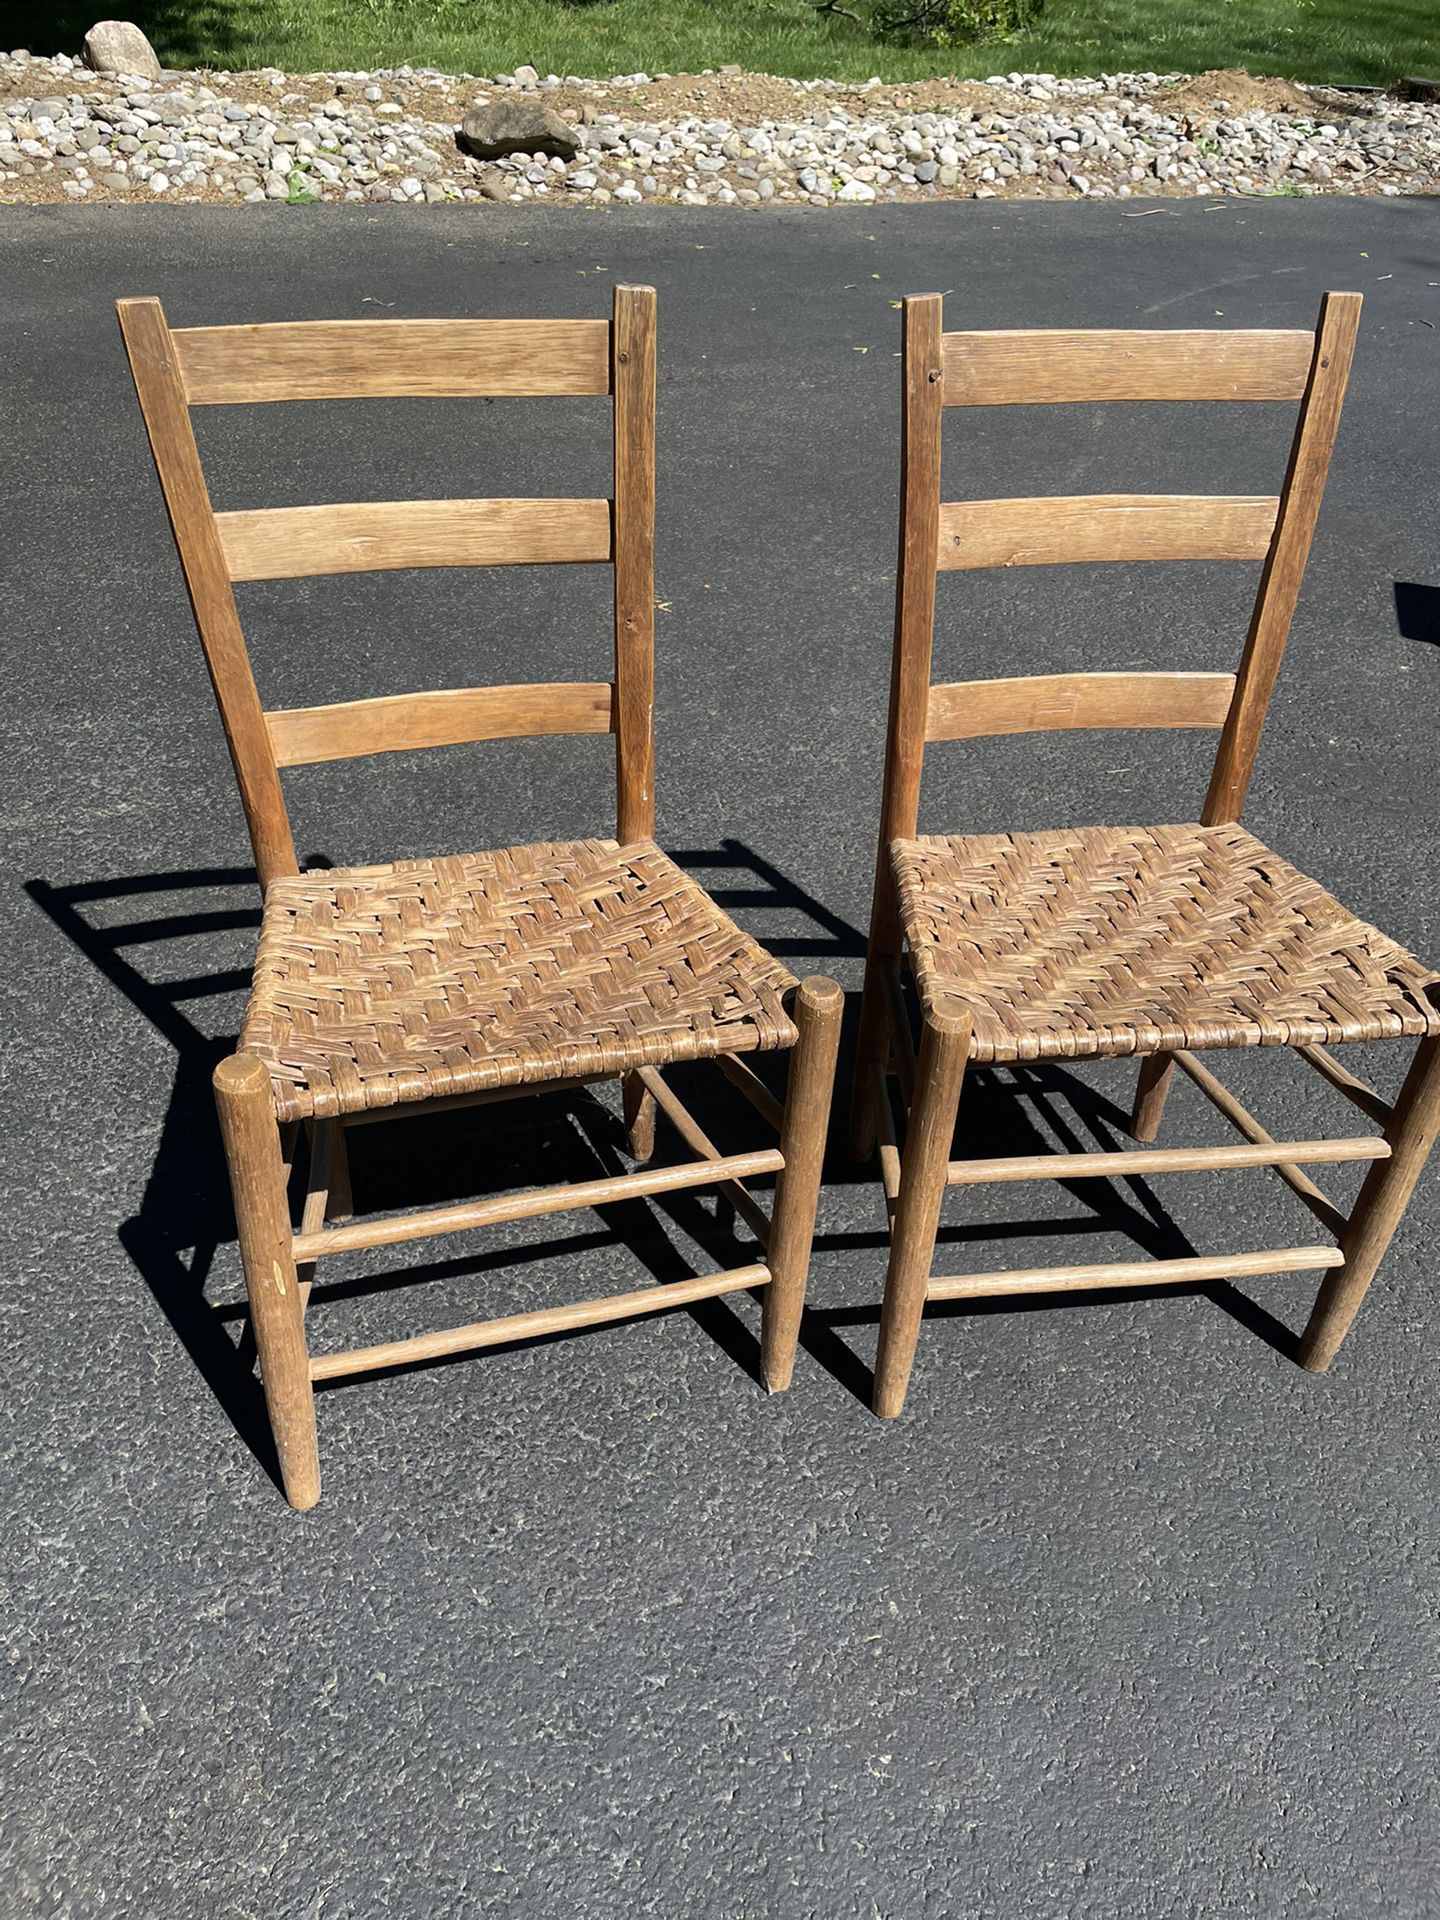 Vintage Woven Chairs